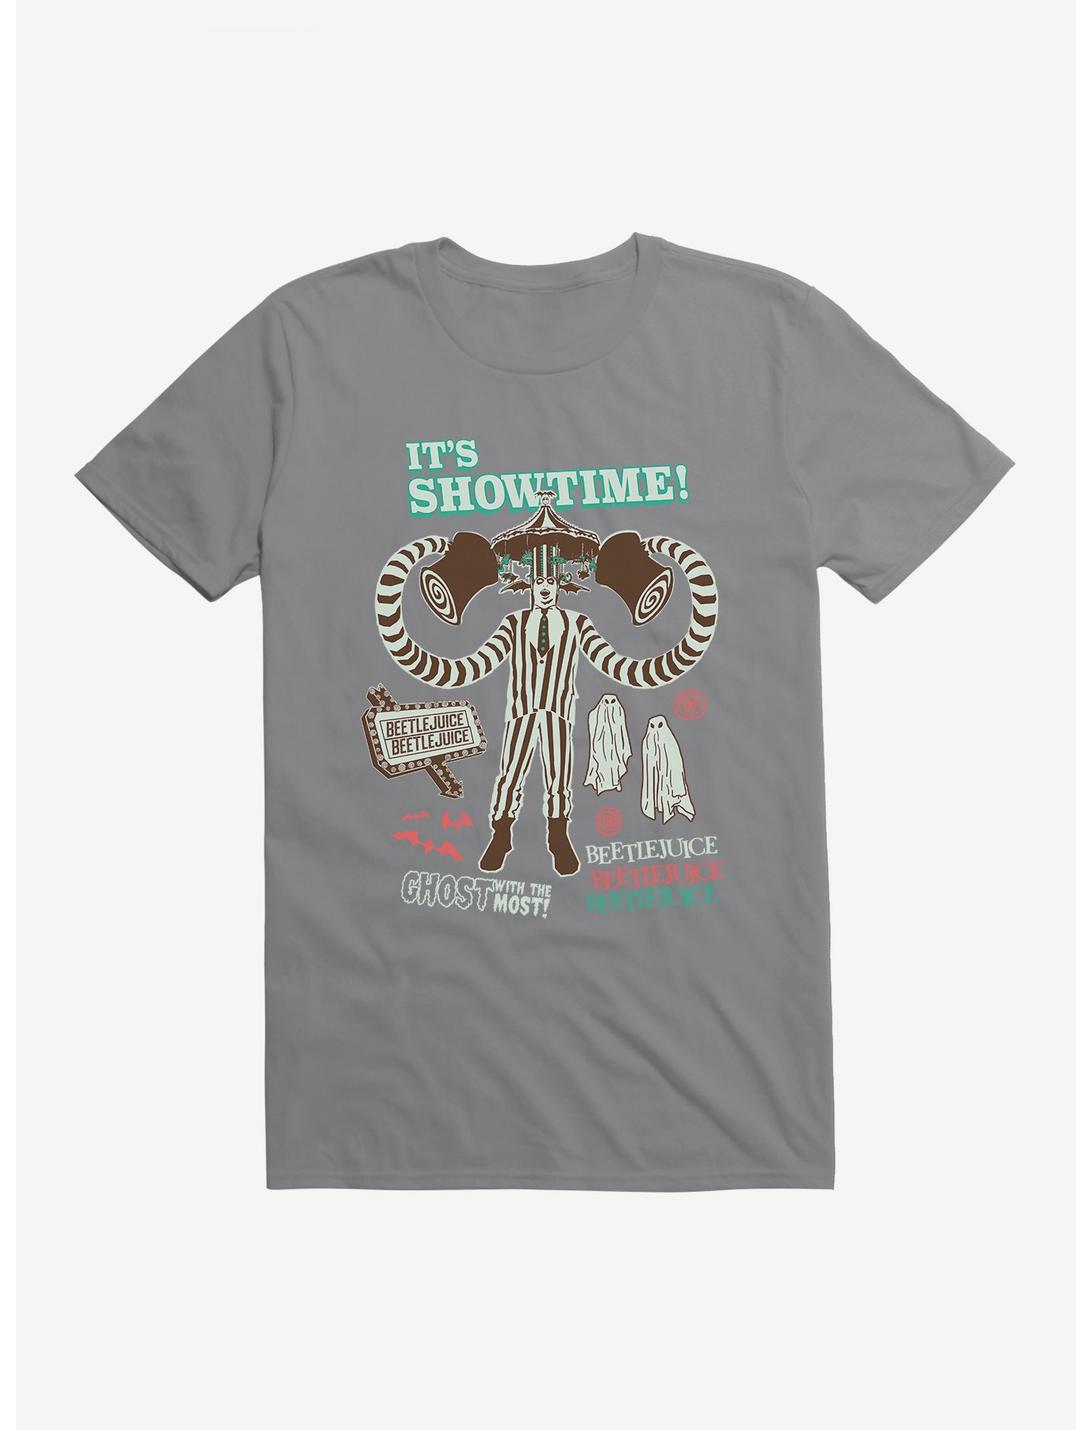 Beetlejuice Ghost With The Most! T-Shirt, STORM GREY, hi-res